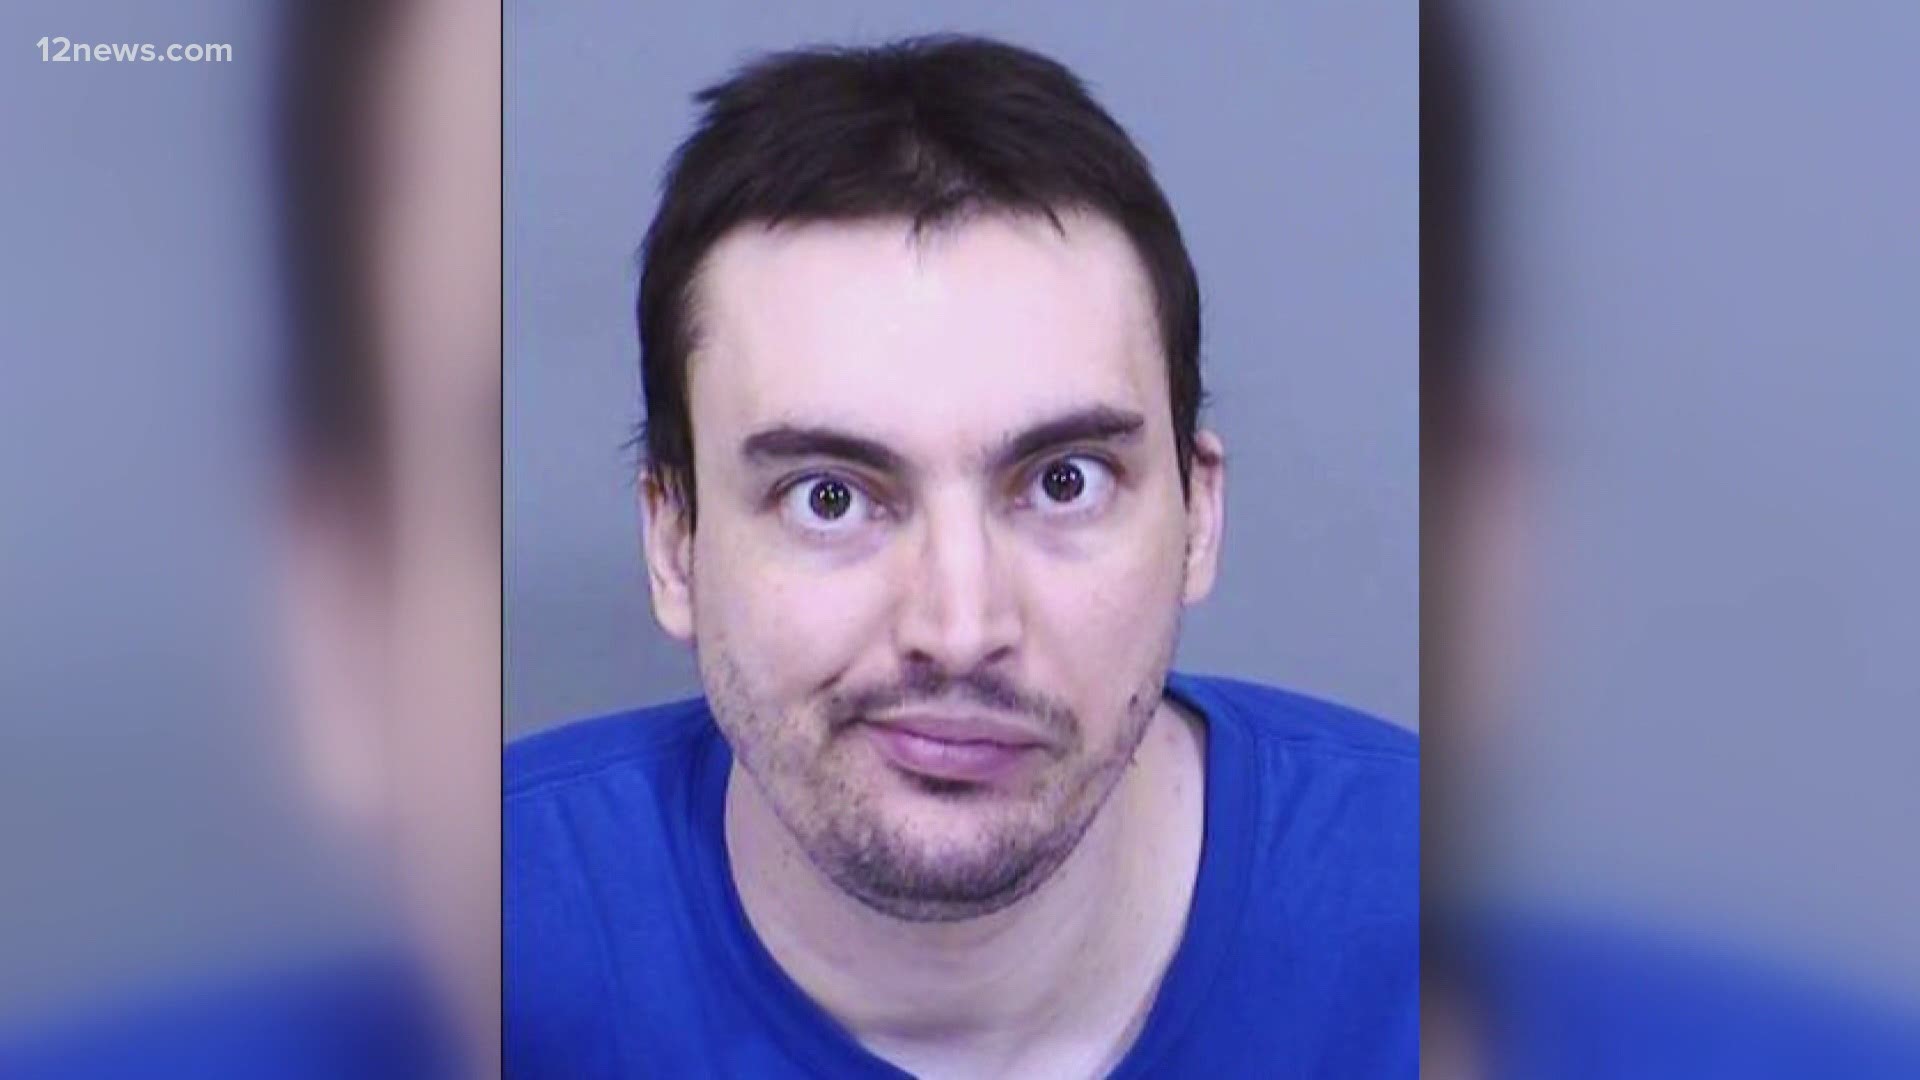 Christopher Lambeth is accused of killing another man at a group home in Gilbert. New police reports offer new insight into what happened that deadly April morning.